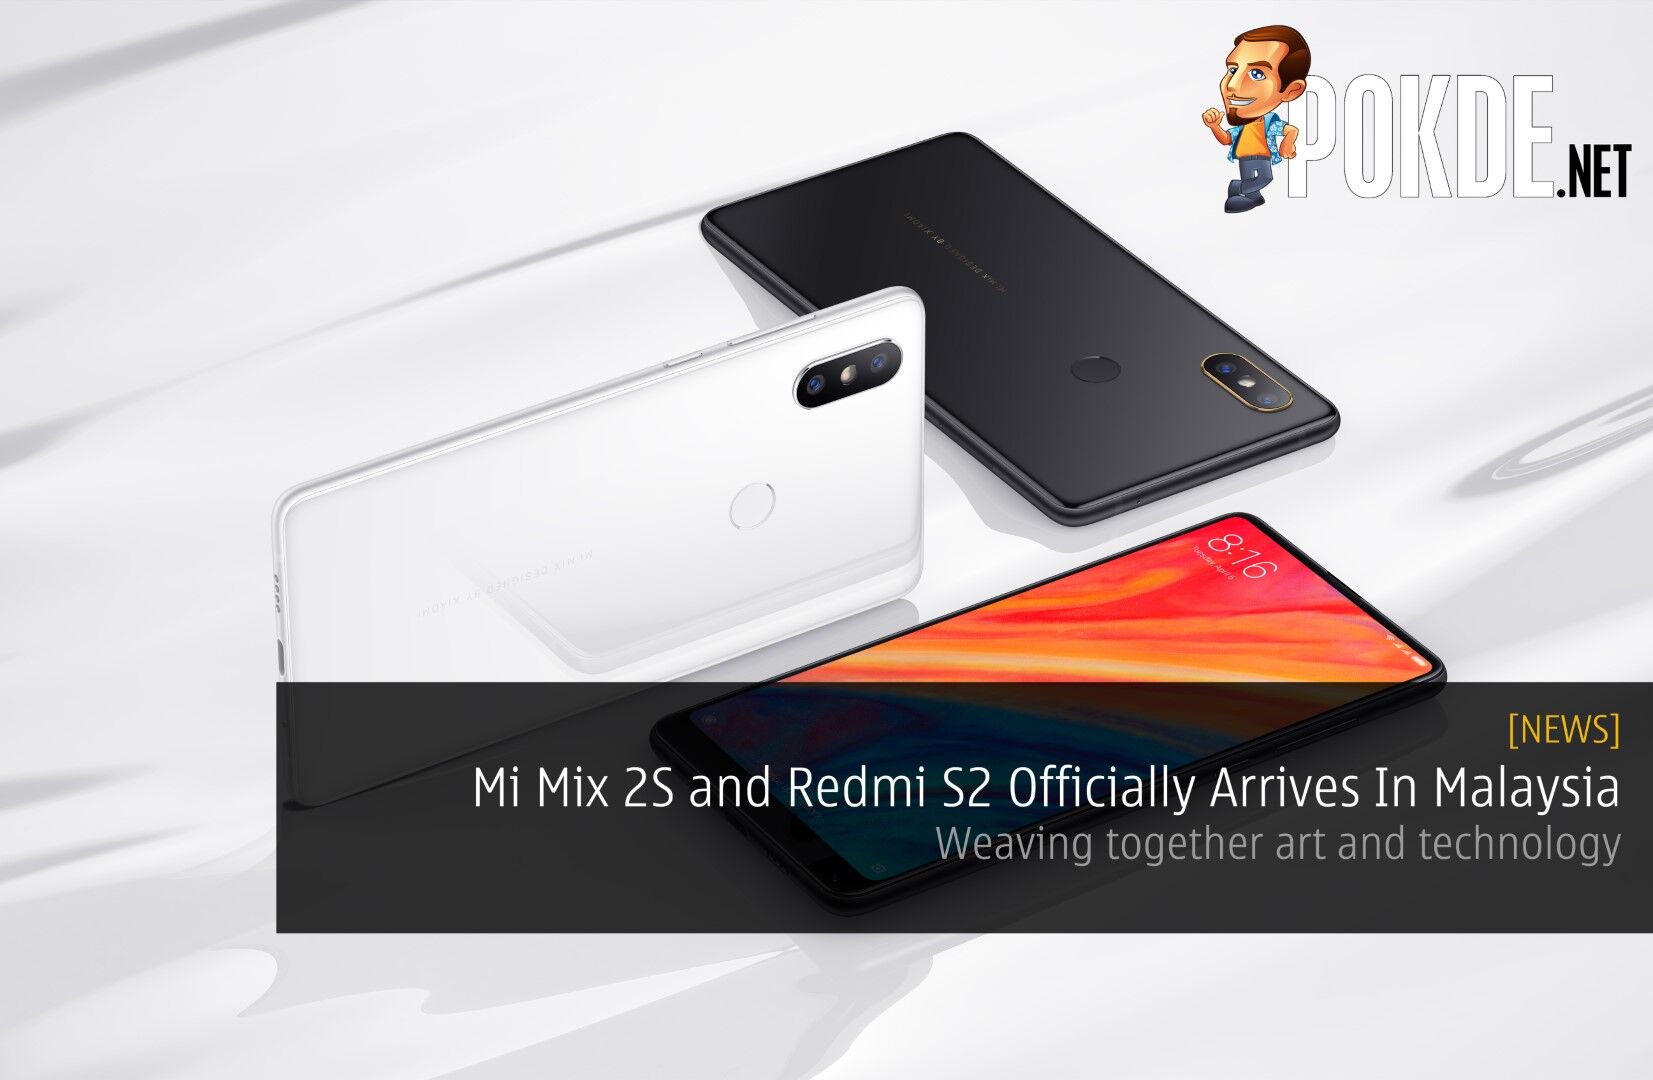 Mi Mix 2S and Redmi S2 Officially Arrives In Malaysia - Weaving together art and technology 36